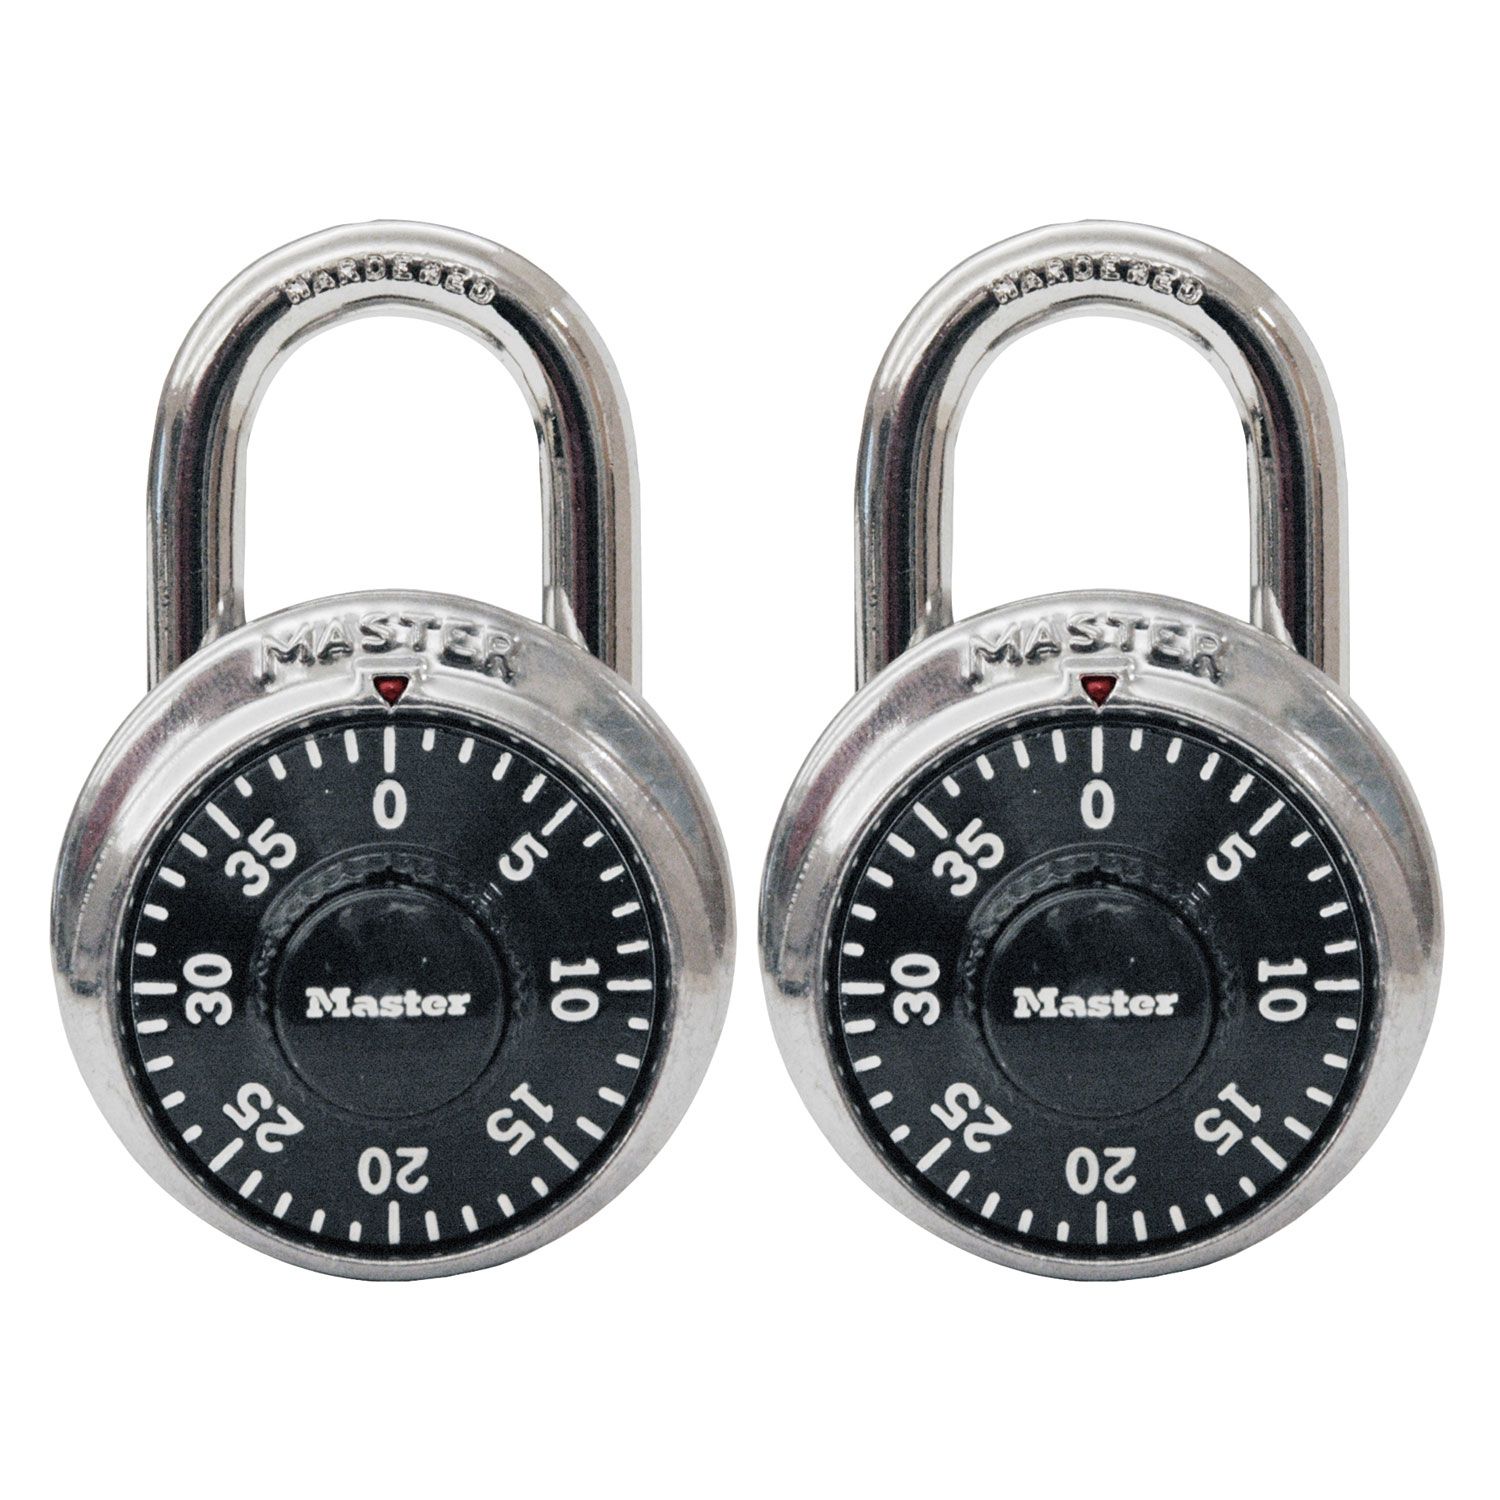 Combination Padlock,Acogedor Fixed Dial Combination Padlock Set Your Own Combination Locker Lock and More Master Coded Lock with Round Storage Lock Pack of 2 